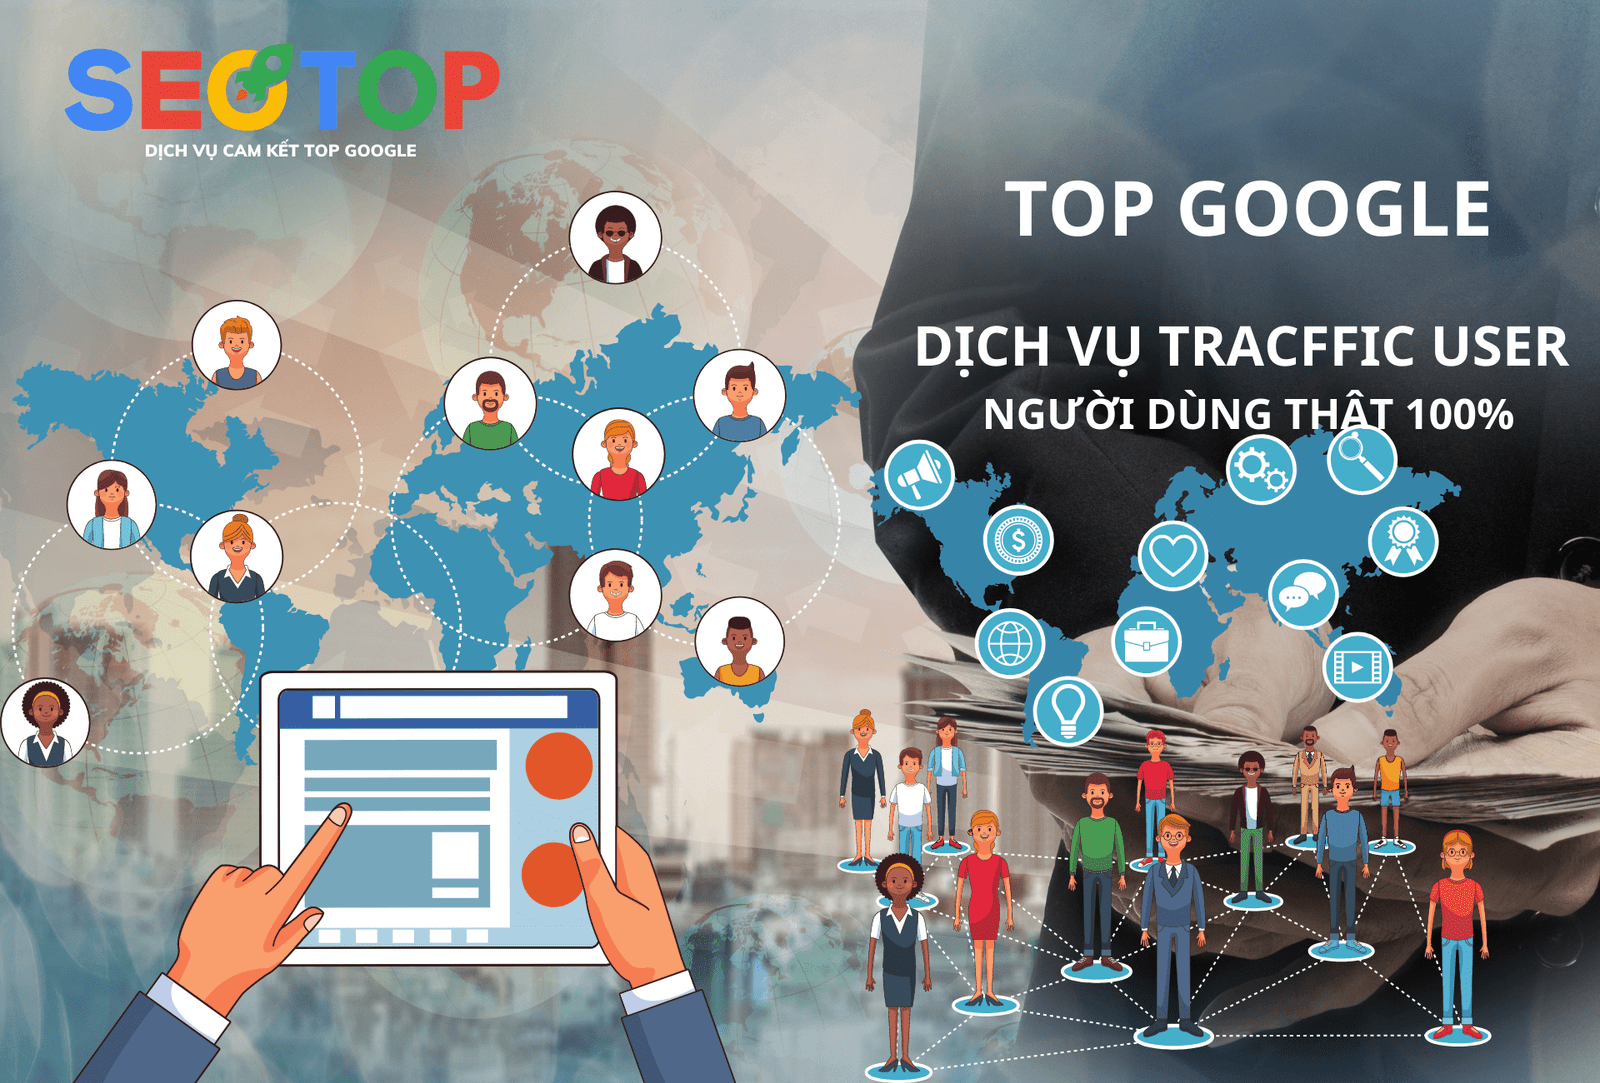 dịch vụ traffic user download dichvuseotop.com.vn